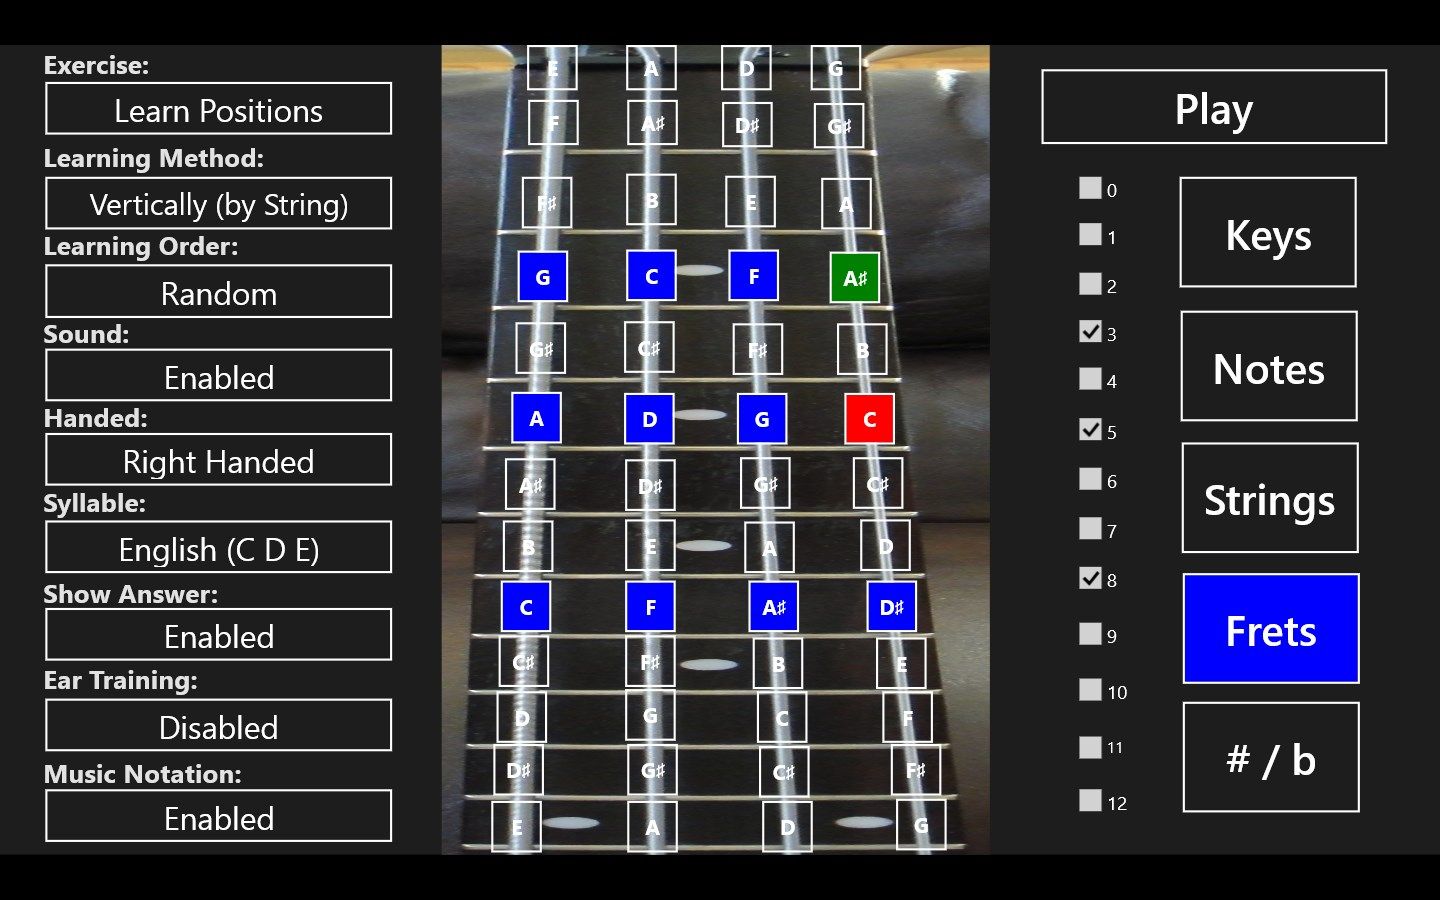 Easily select any combination of frets to work on